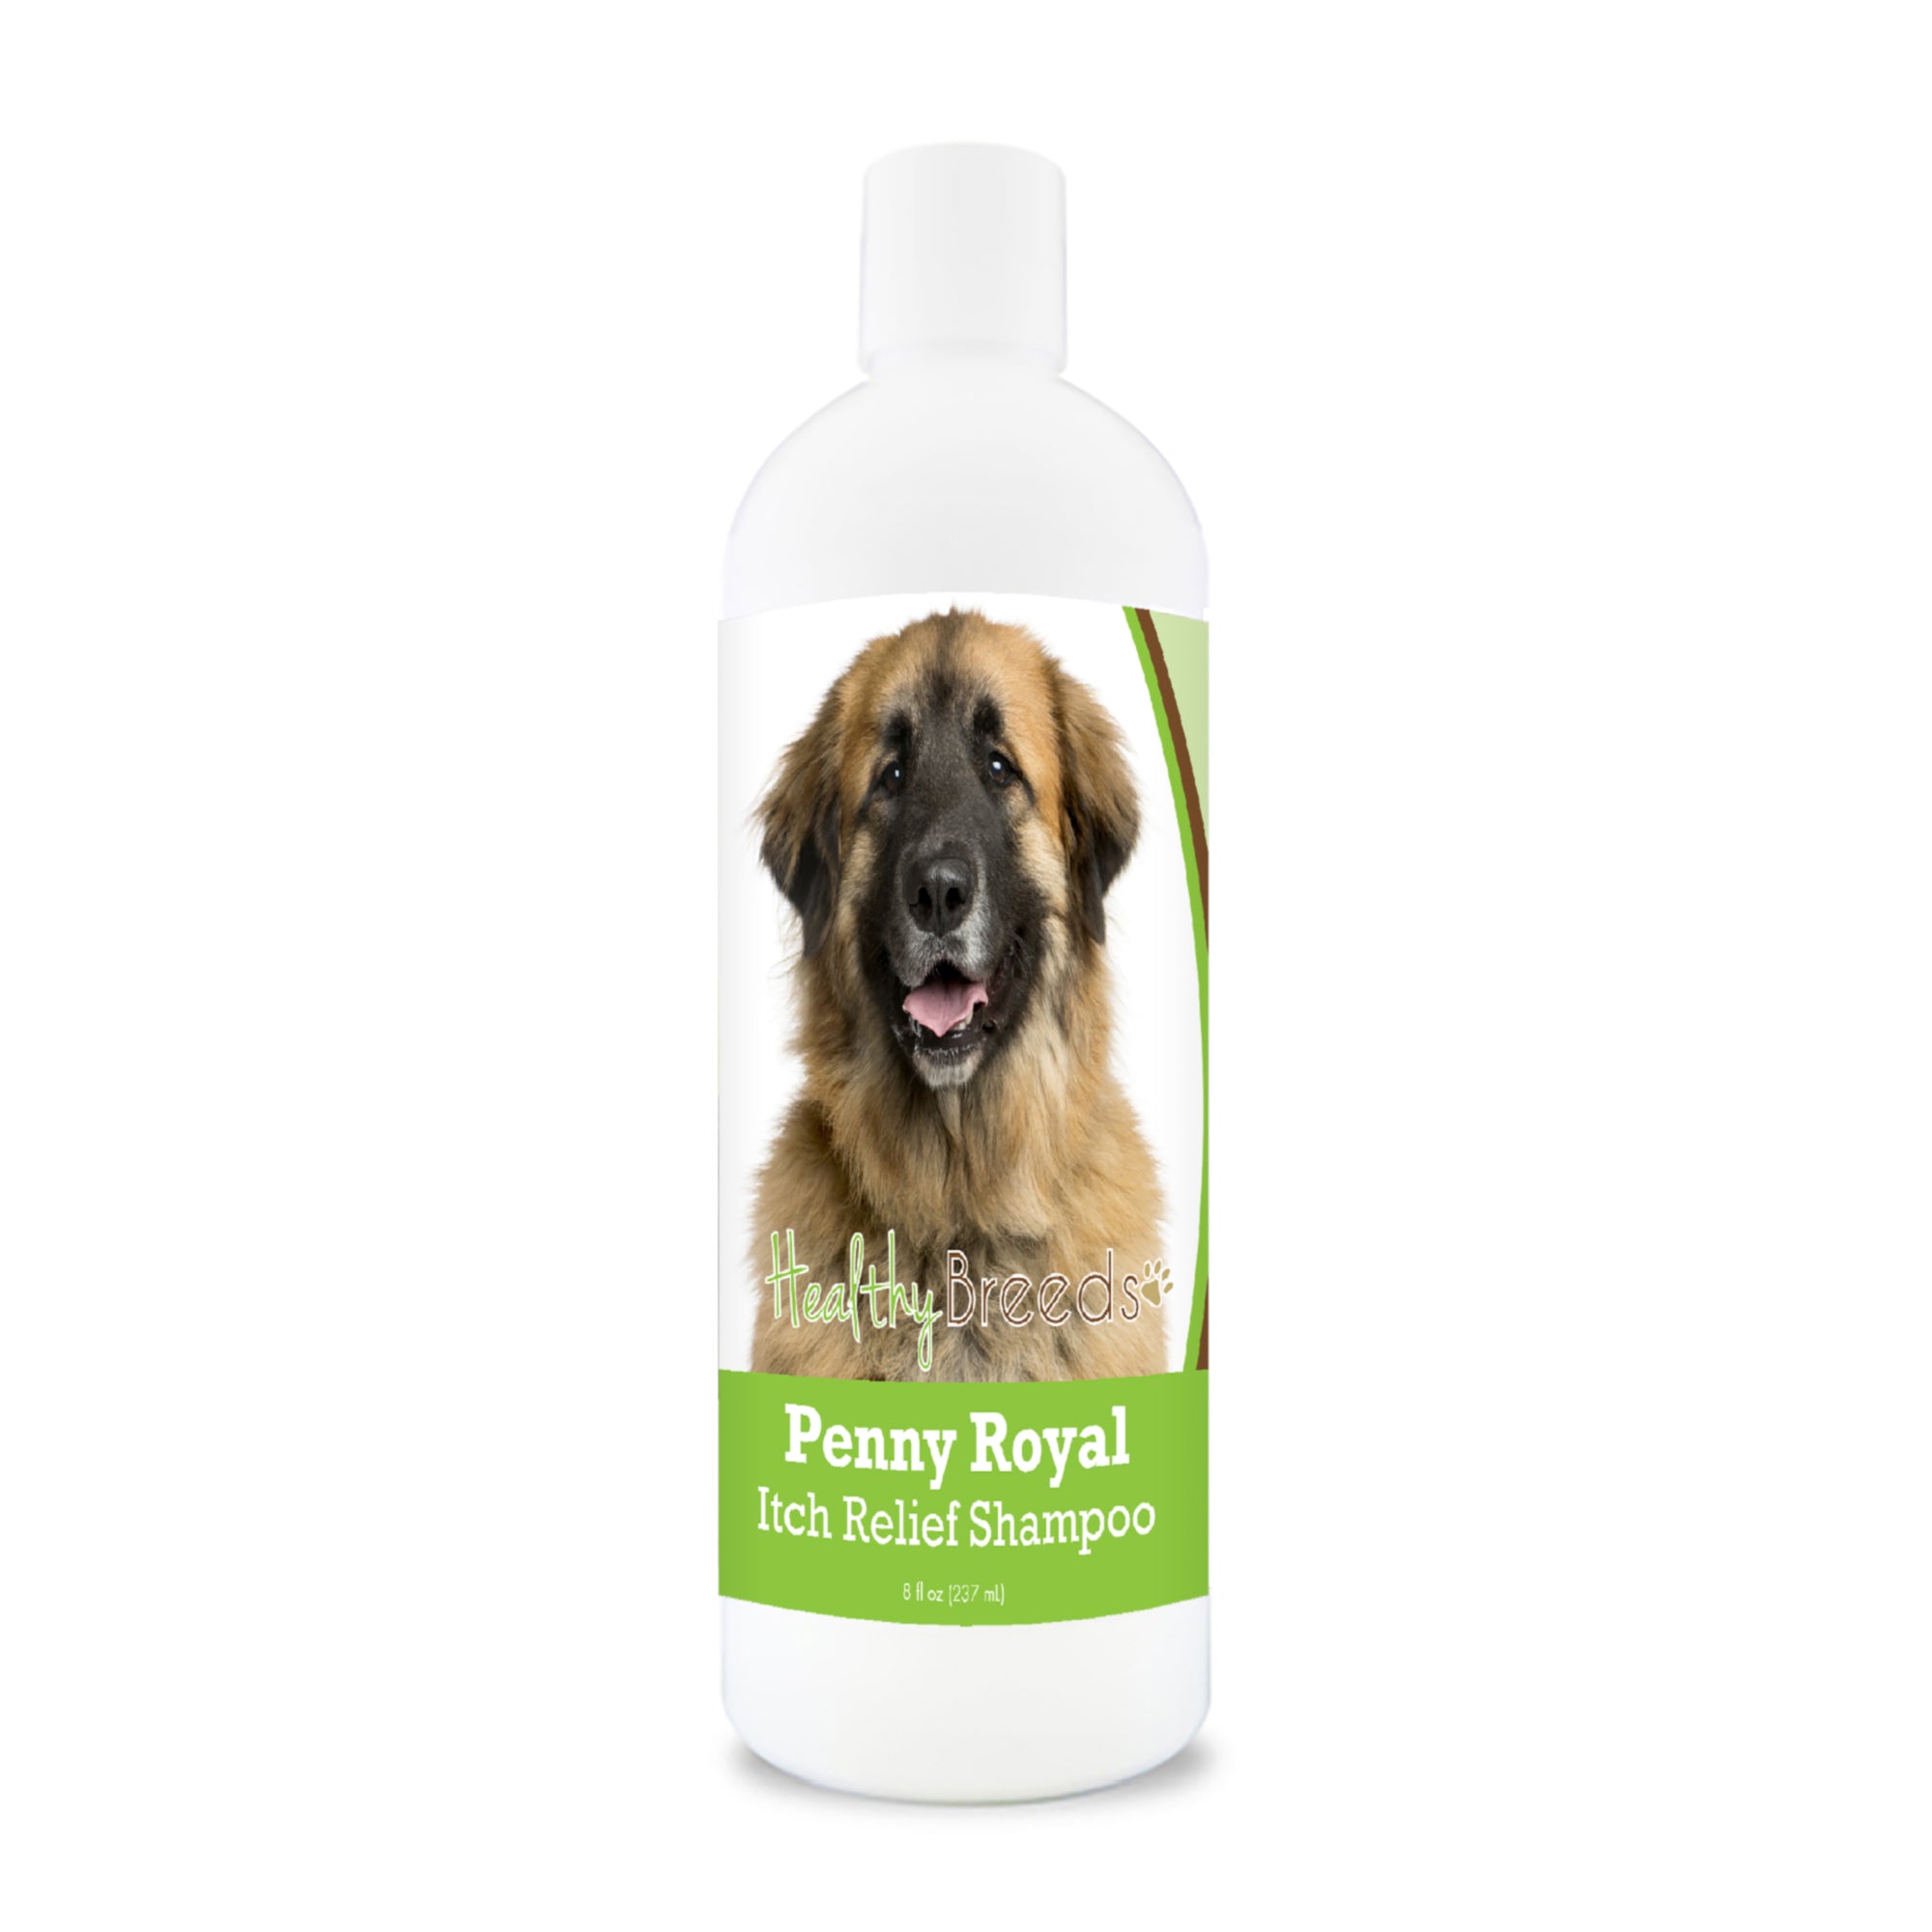 Leonberger Penny Royal Itch Relief Shampoo 8 oz